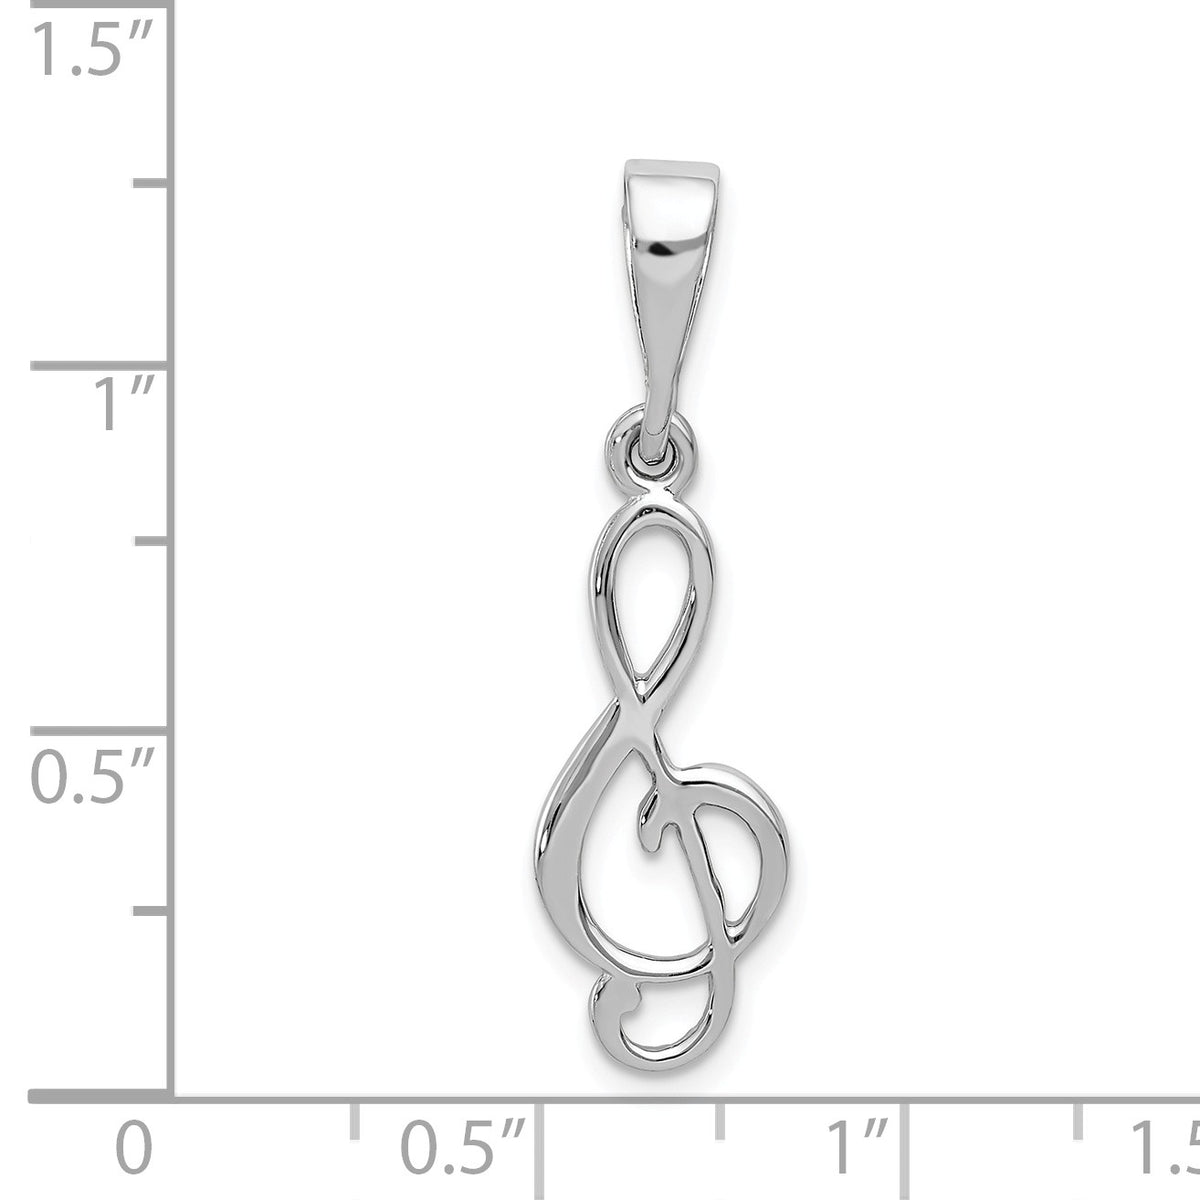 Alternate view of the 14k White Gold Flat Back Treble Clef Pendant by The Black Bow Jewelry Co.